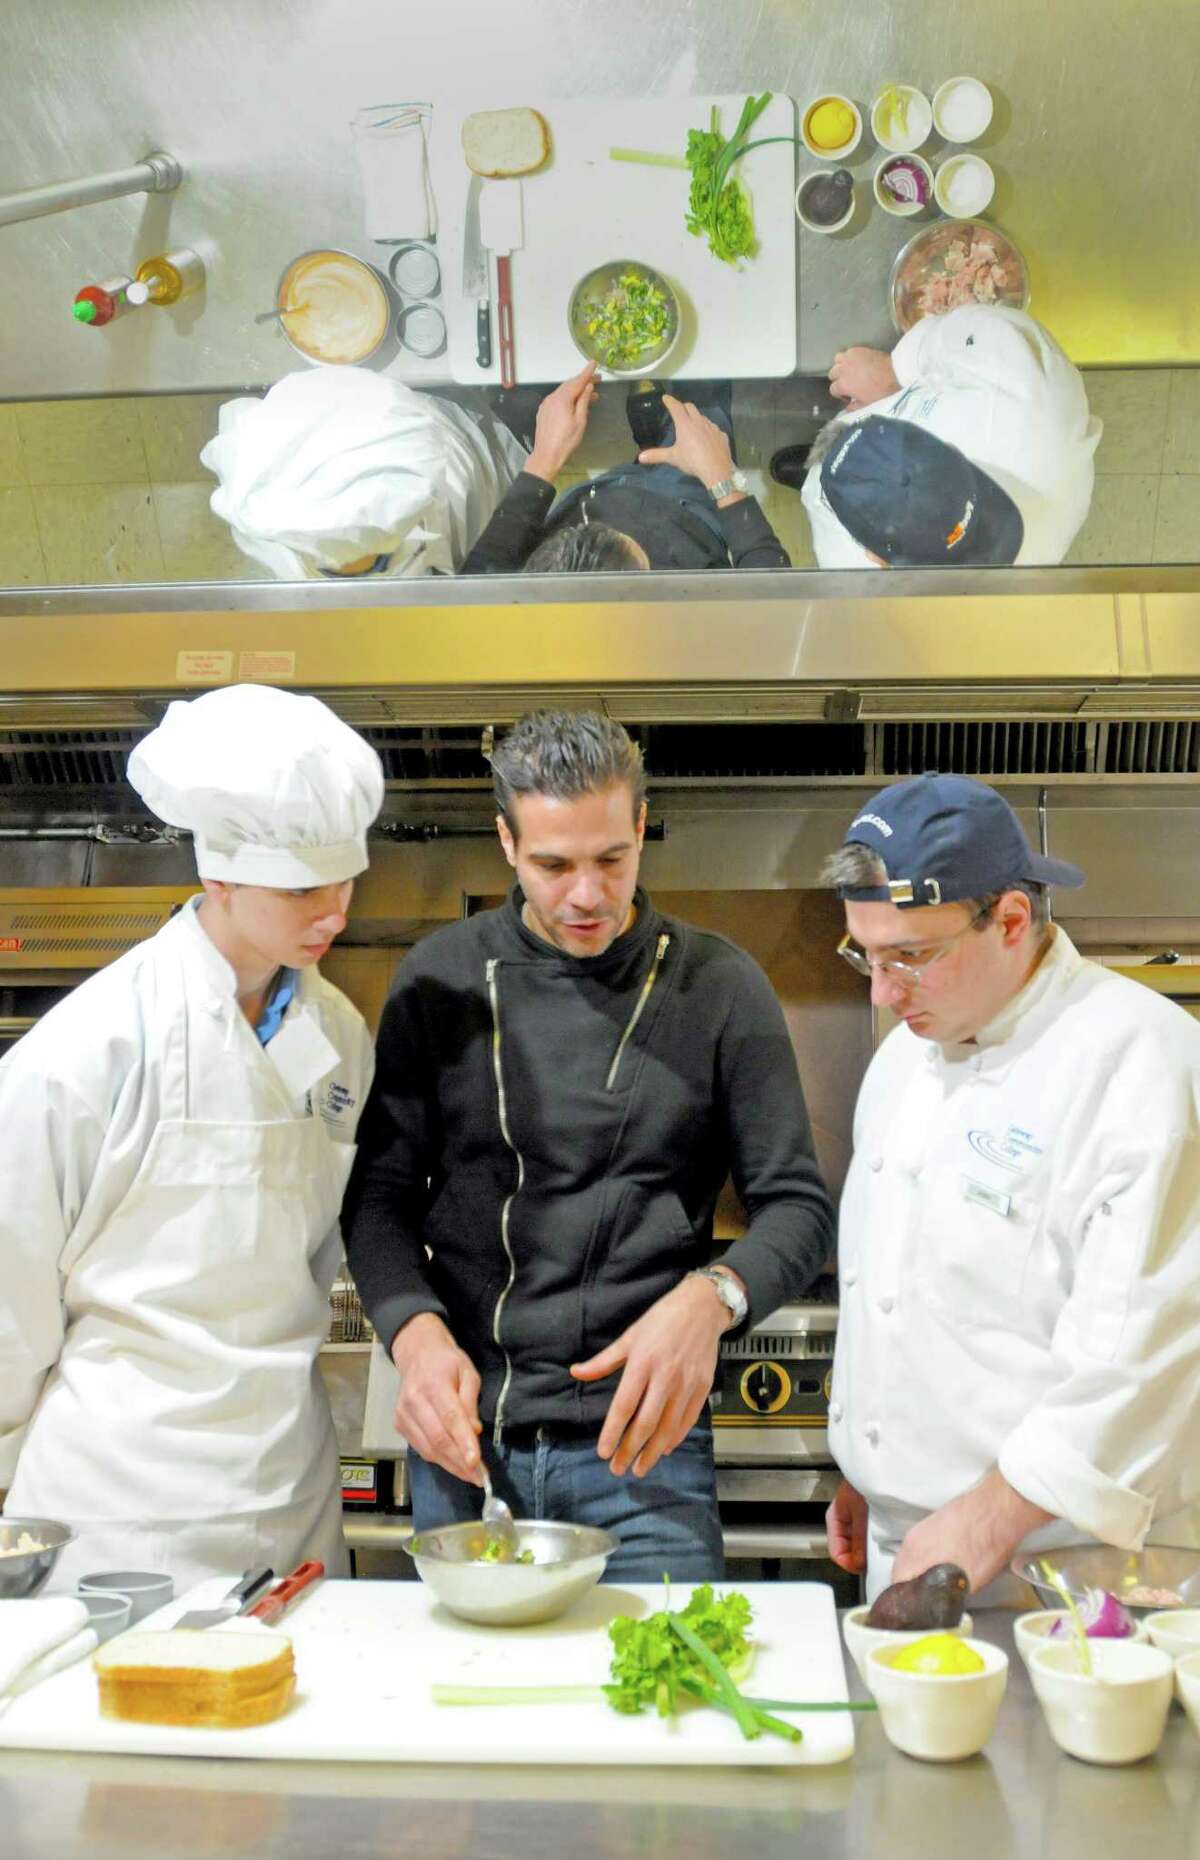 Angelo Sosa, a "Top Chef" contestant from season 7, center, with students Nicholas Shafransky of West Haven, left, and Joshua Semeraro of Waterbury at Gateway Community College in New Haven.(Peter Hvizdak/Journal Register News Service)